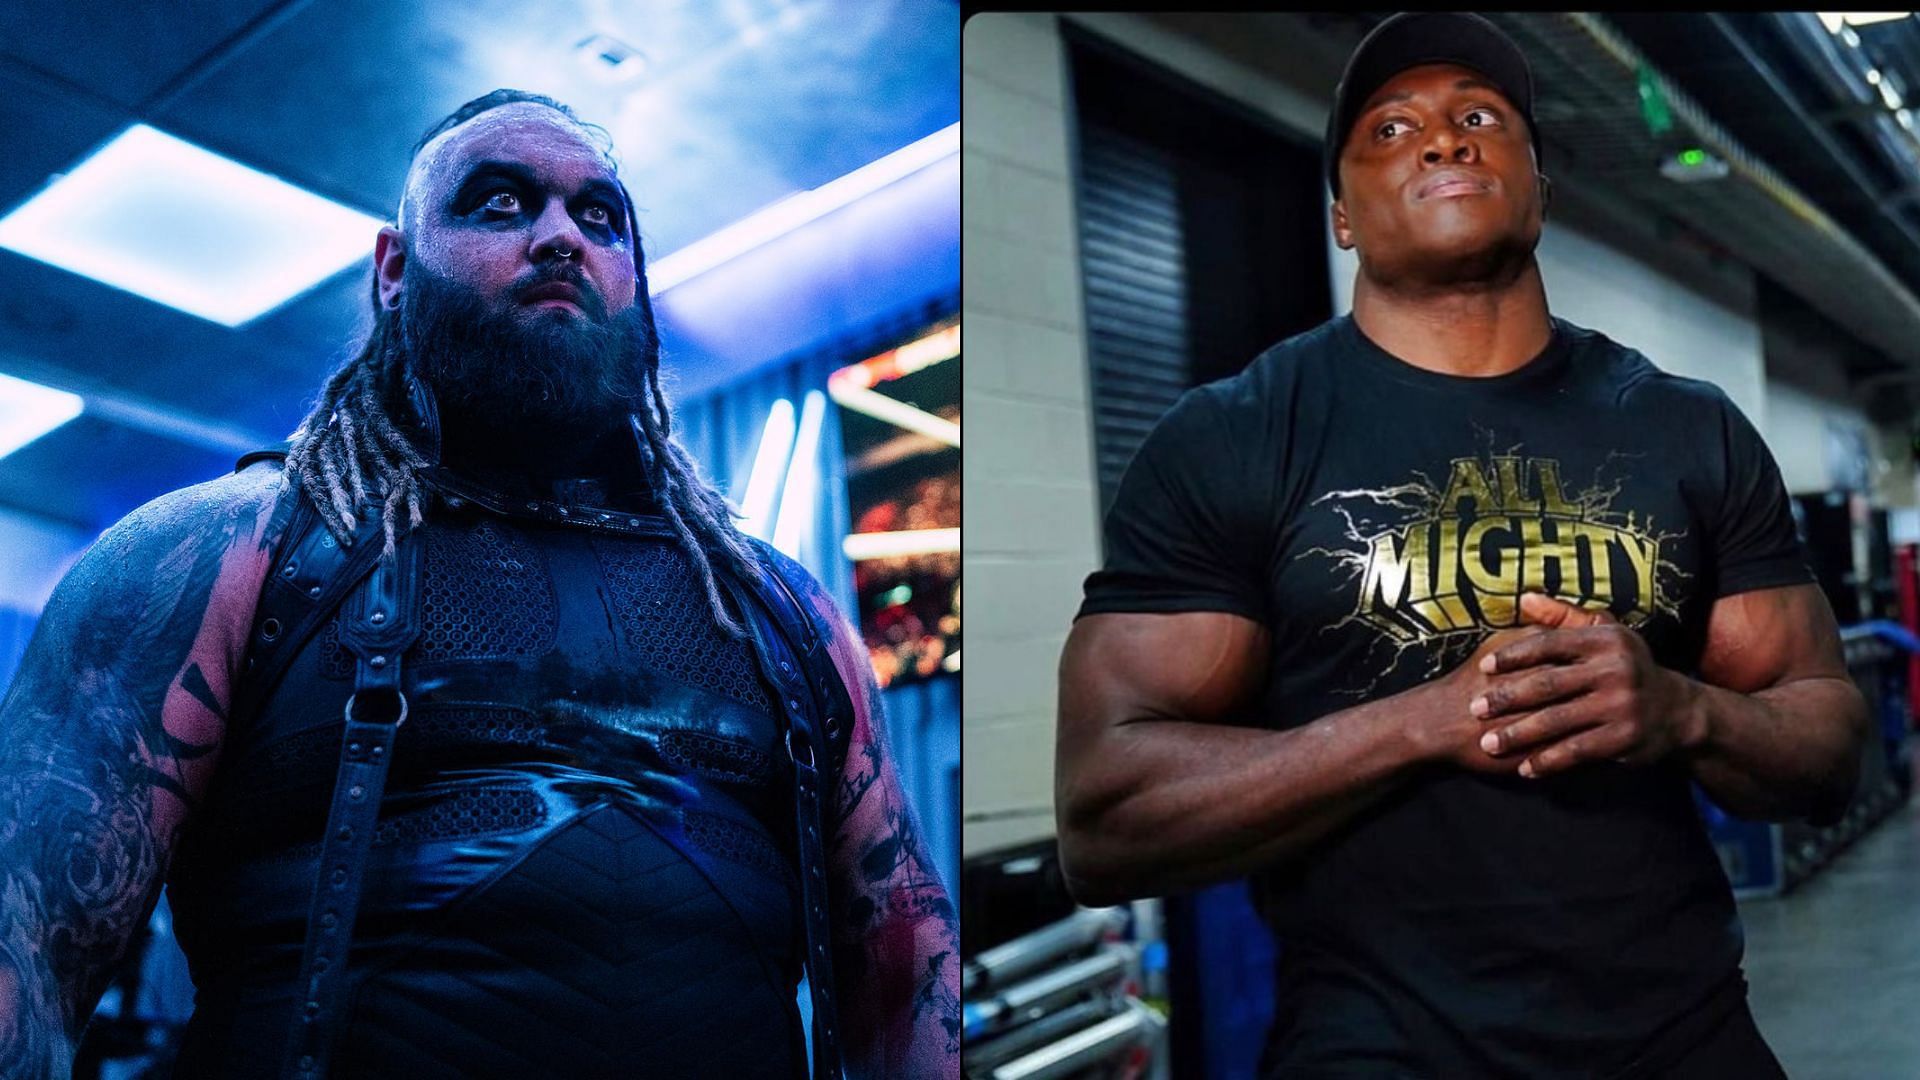 Bobby Lashley could come for Bray Wyatt on WWE SmackDown